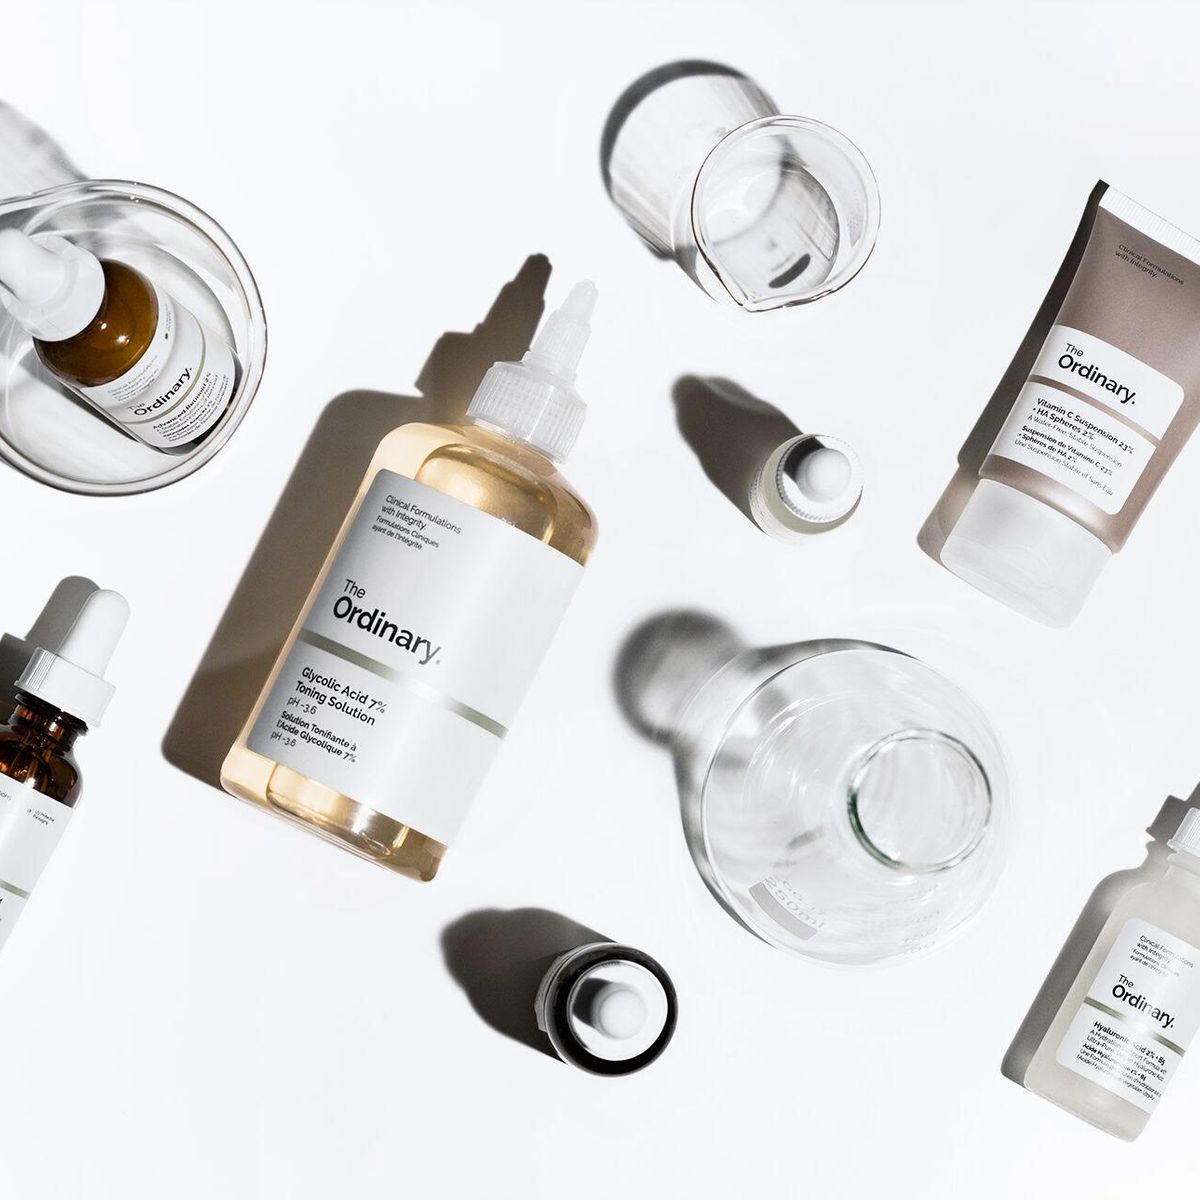 Products from The ORDINARY That You Shouldn’t Mix